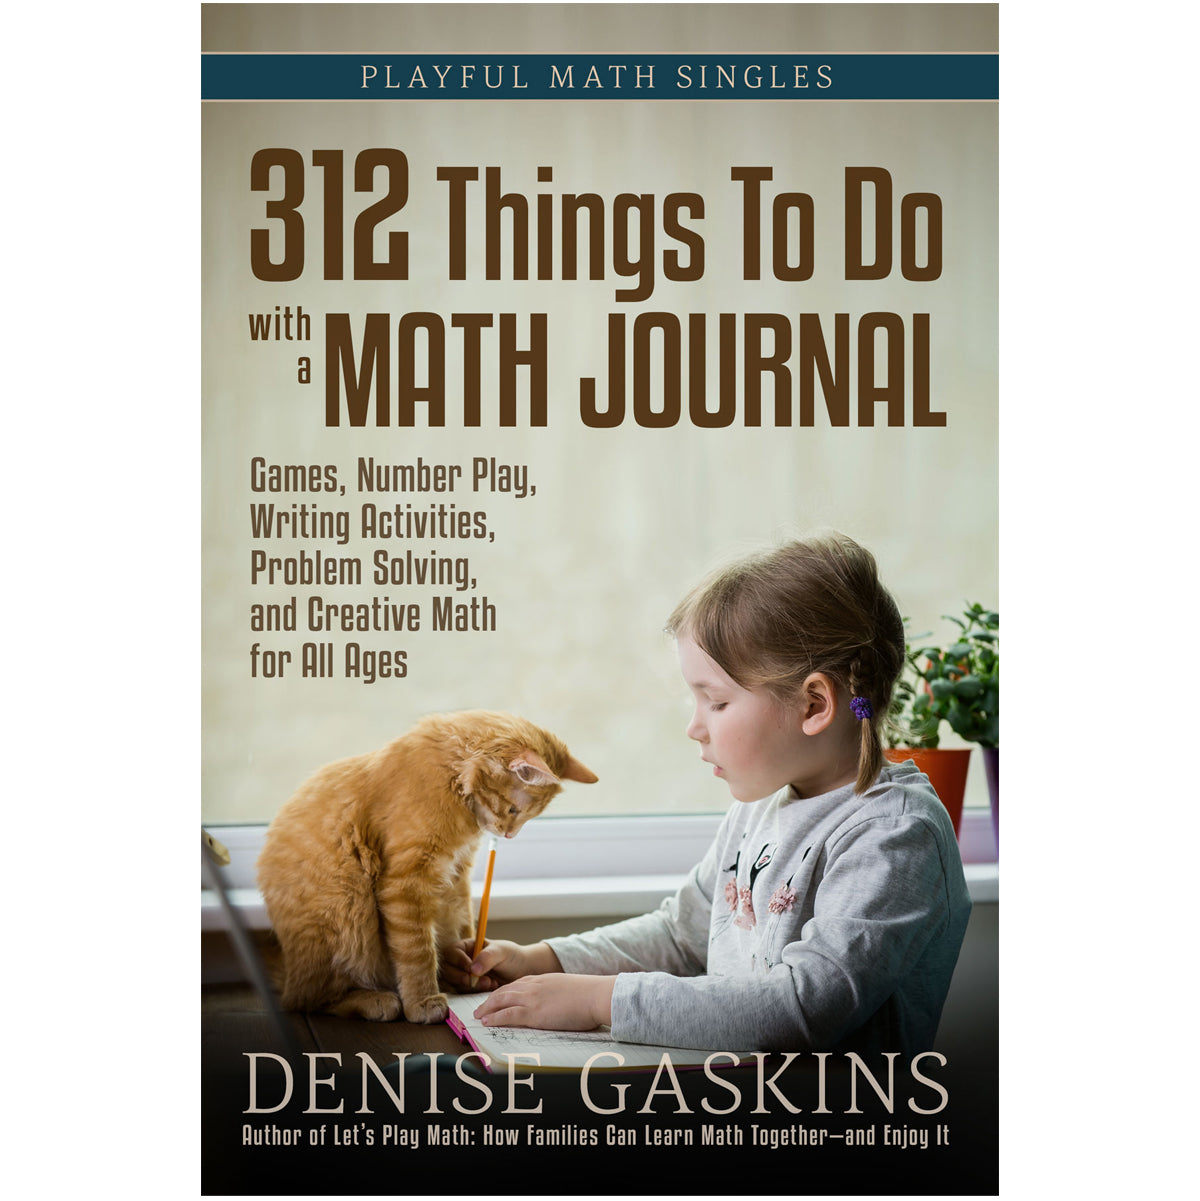 Math journaling games and activities by Denise Gaskins